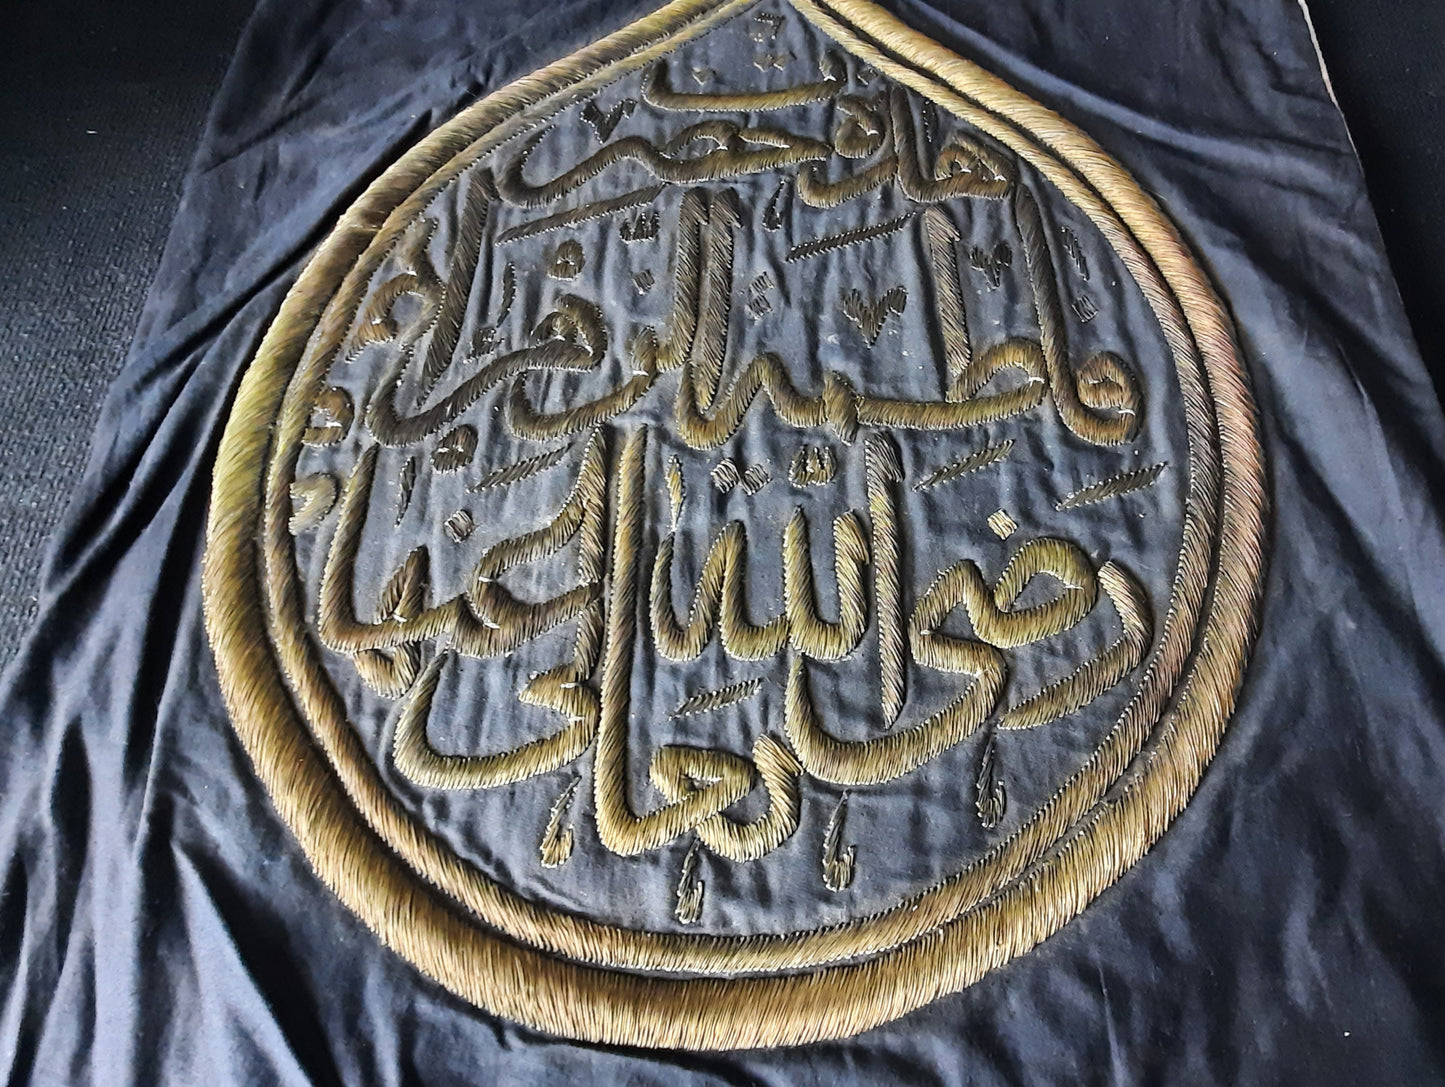 Ottoman Curtain Related To Fatimatu Zahra RA from Masjid Nabawi , Prophet Mosque in Medina